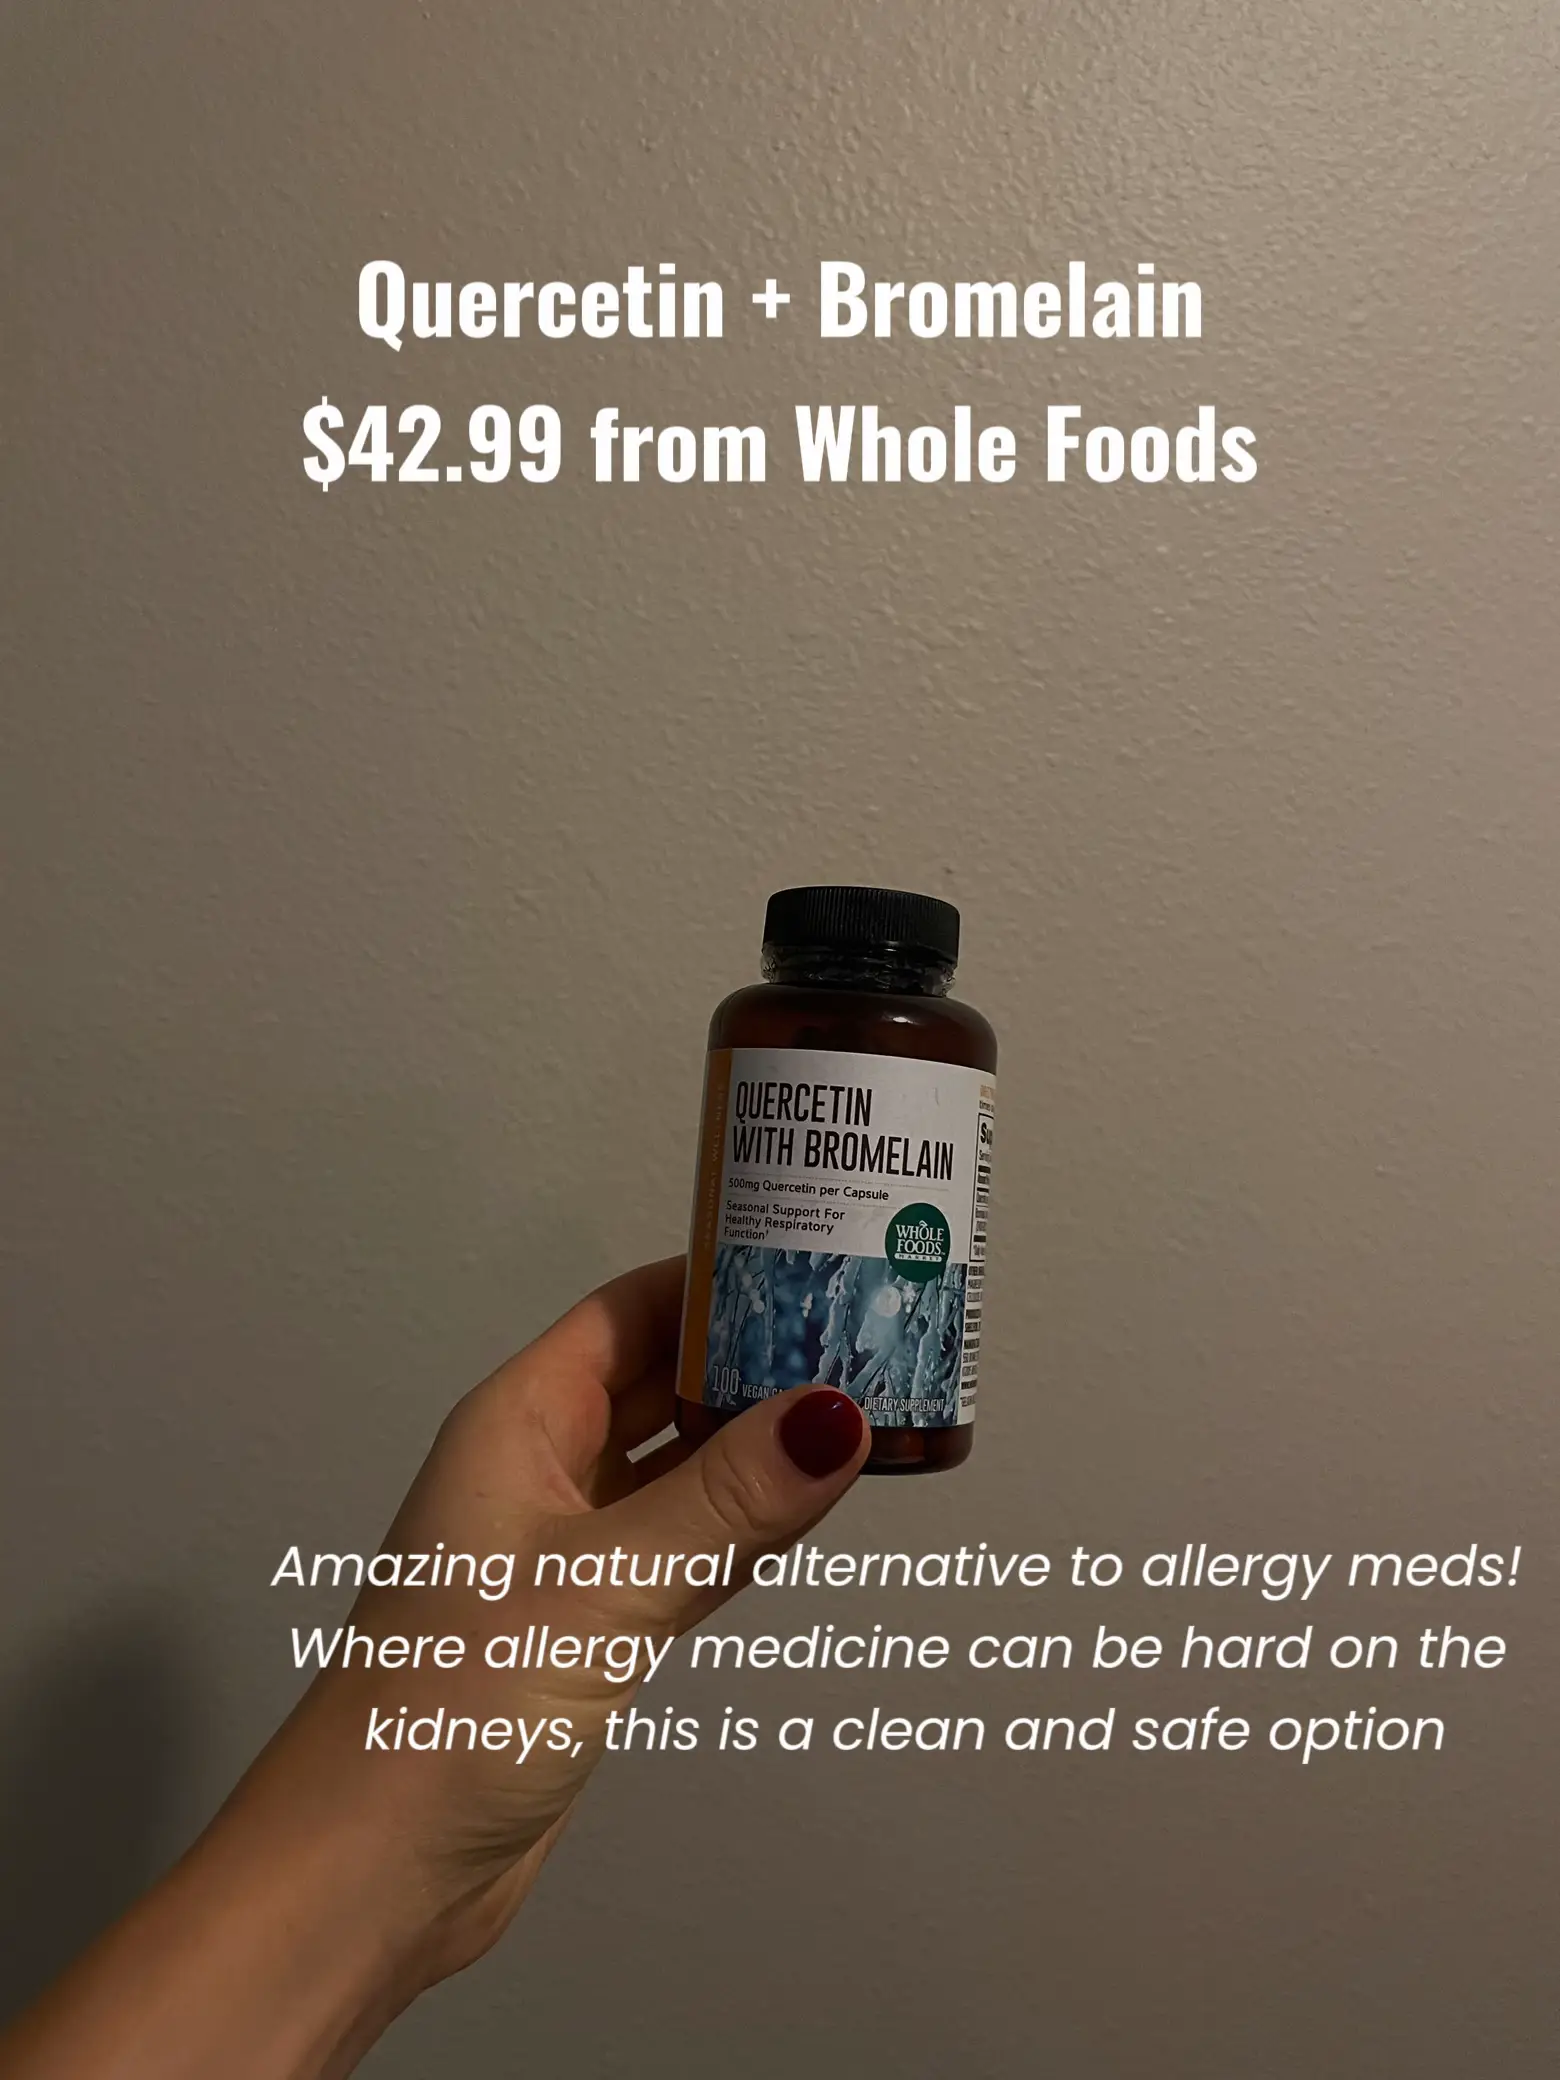  A person is holding a bottle of Quercetin with Bromelain.